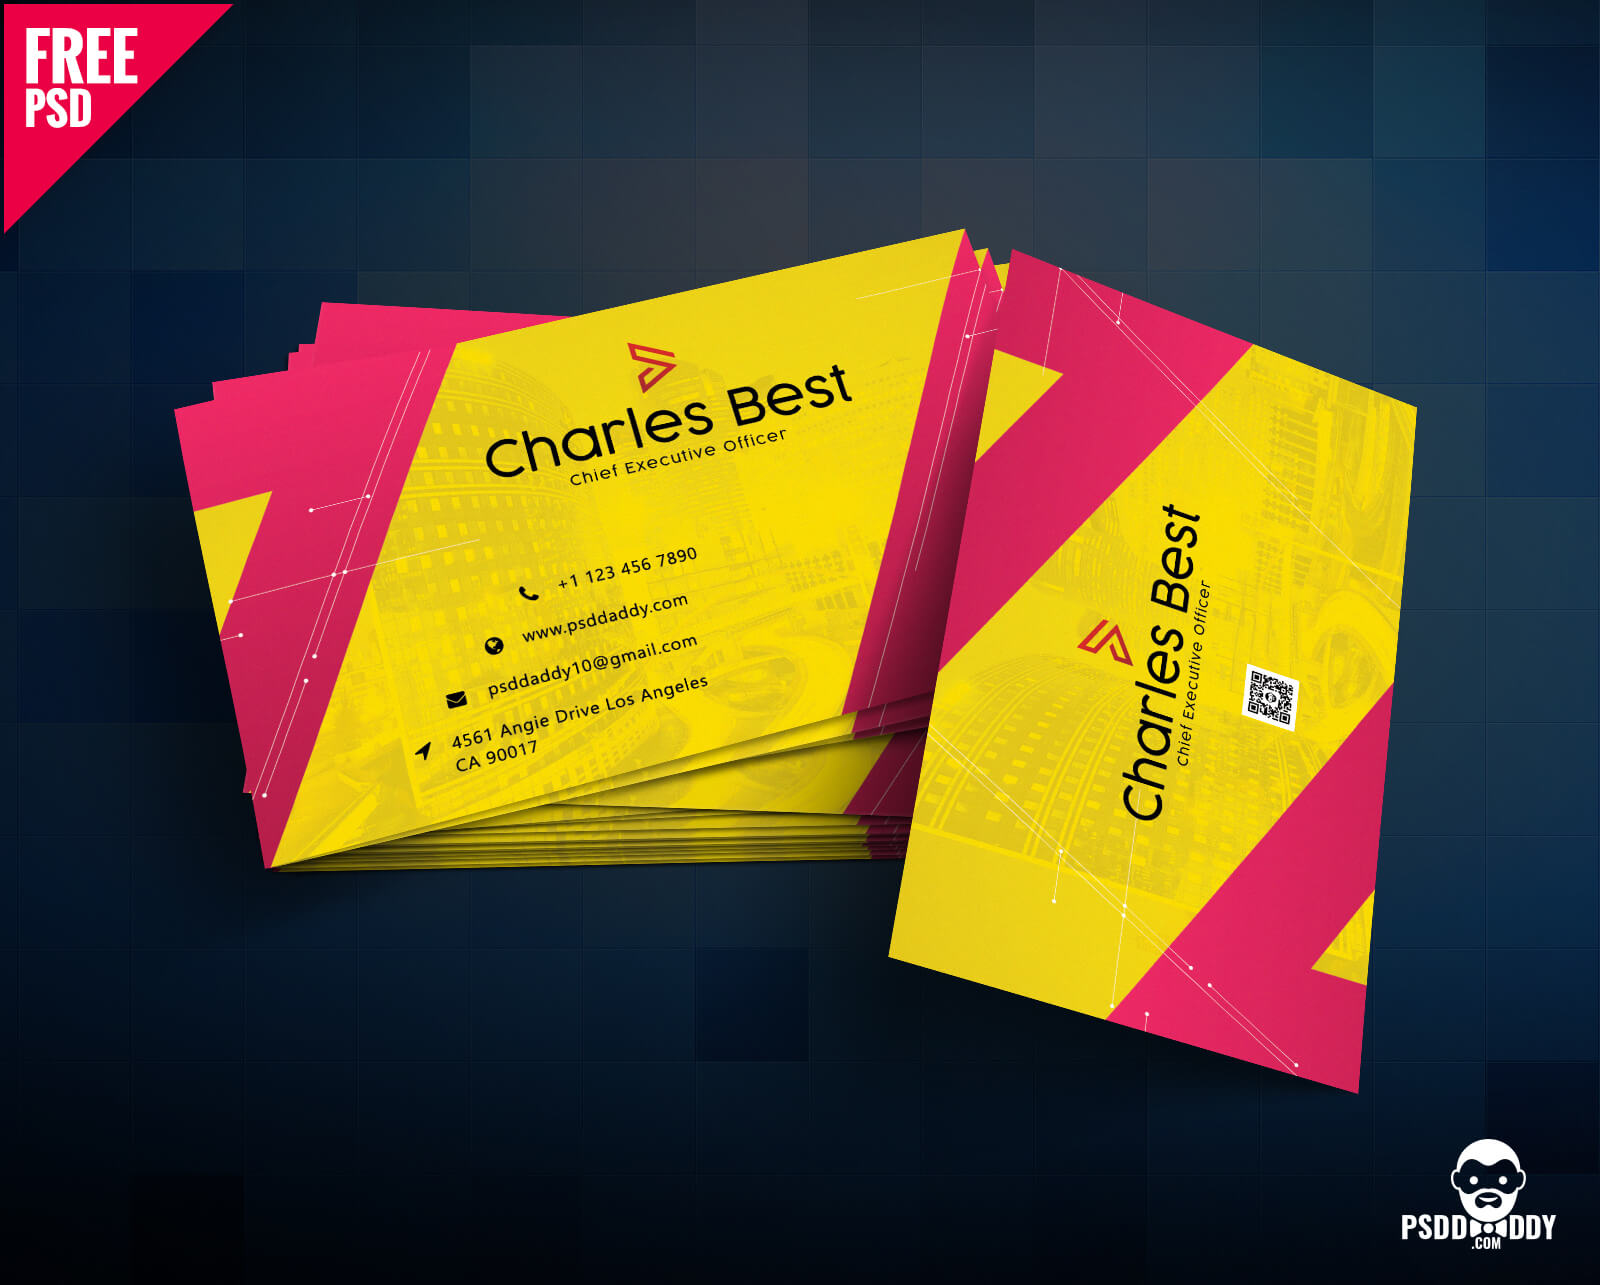 Download] Creative Business Card Free Psd | Psddaddy With Regard To Visiting Card Template Psd Free Download